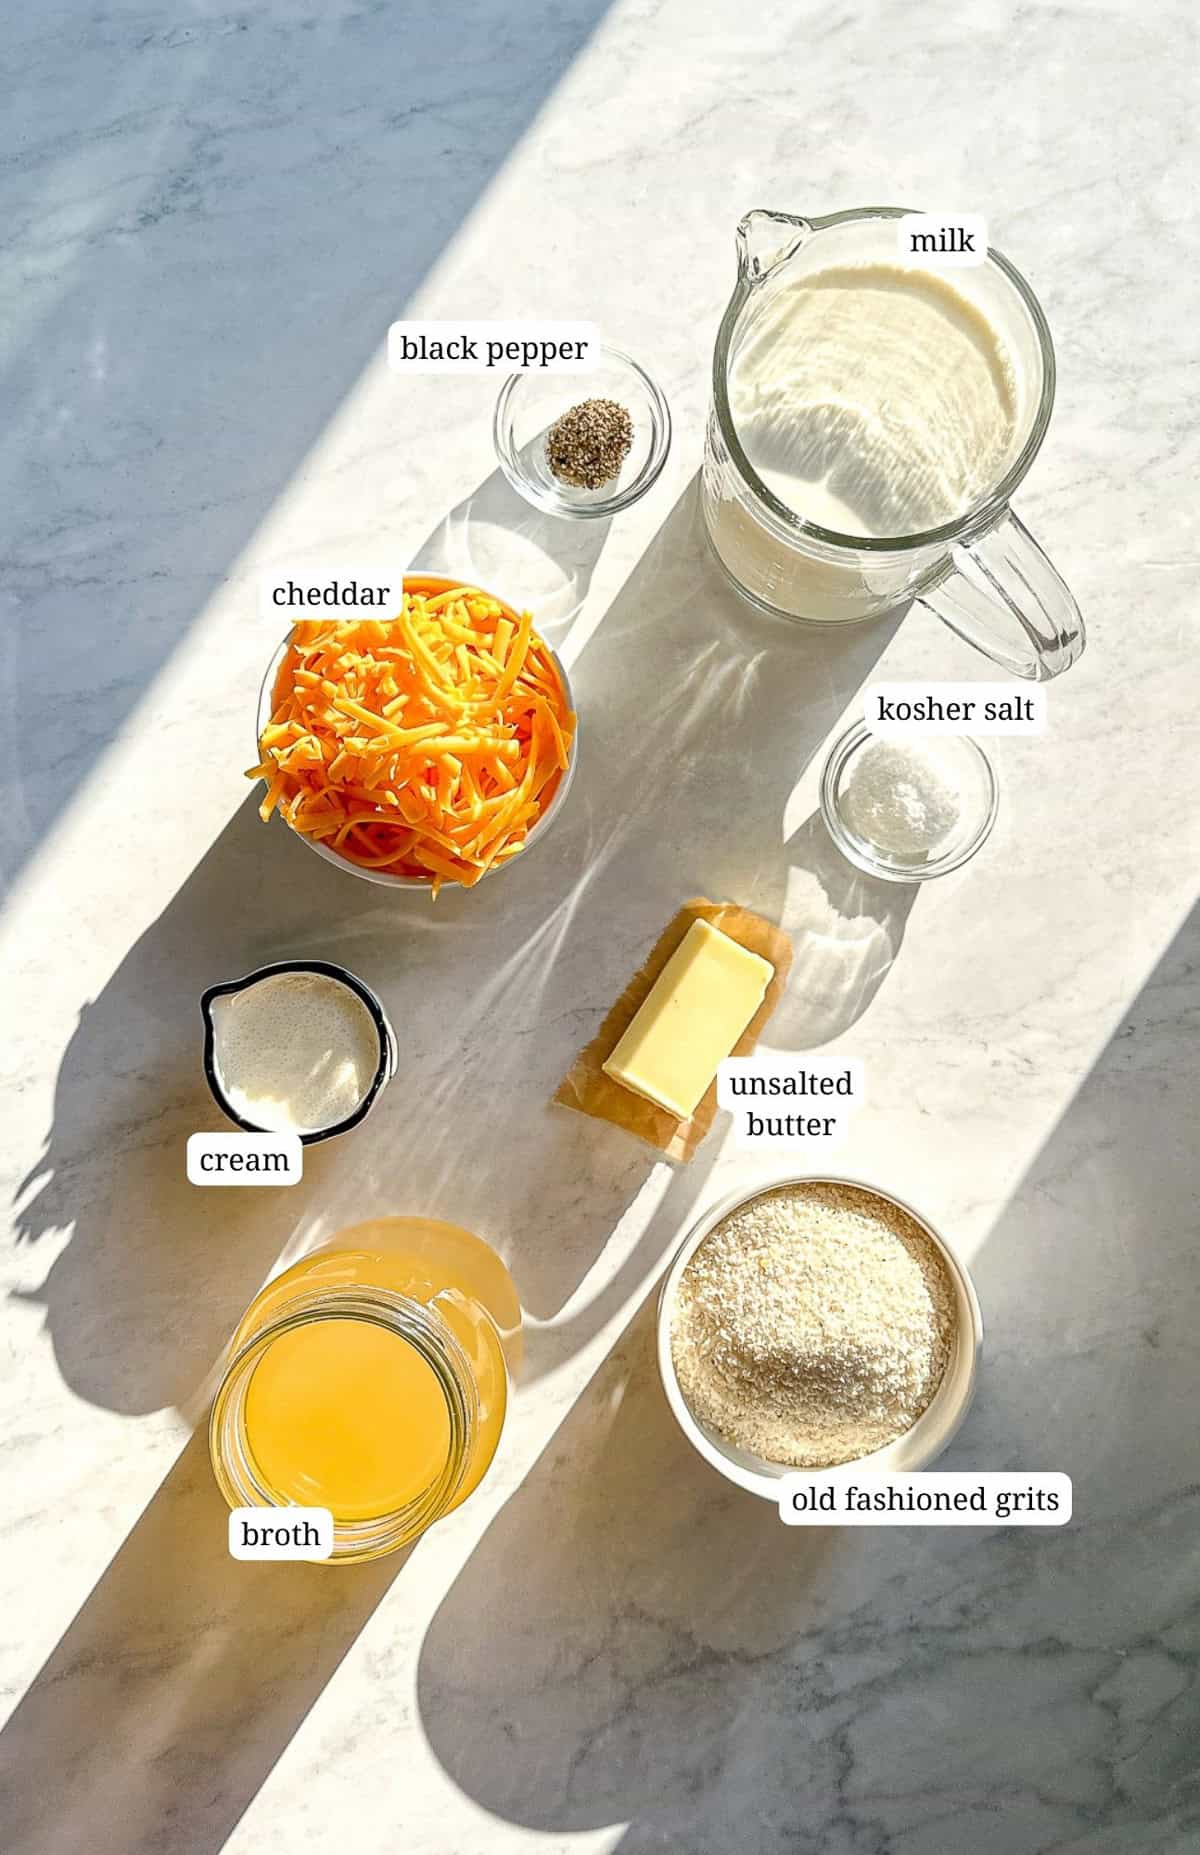 Ingredients to make creamy cheese grits.